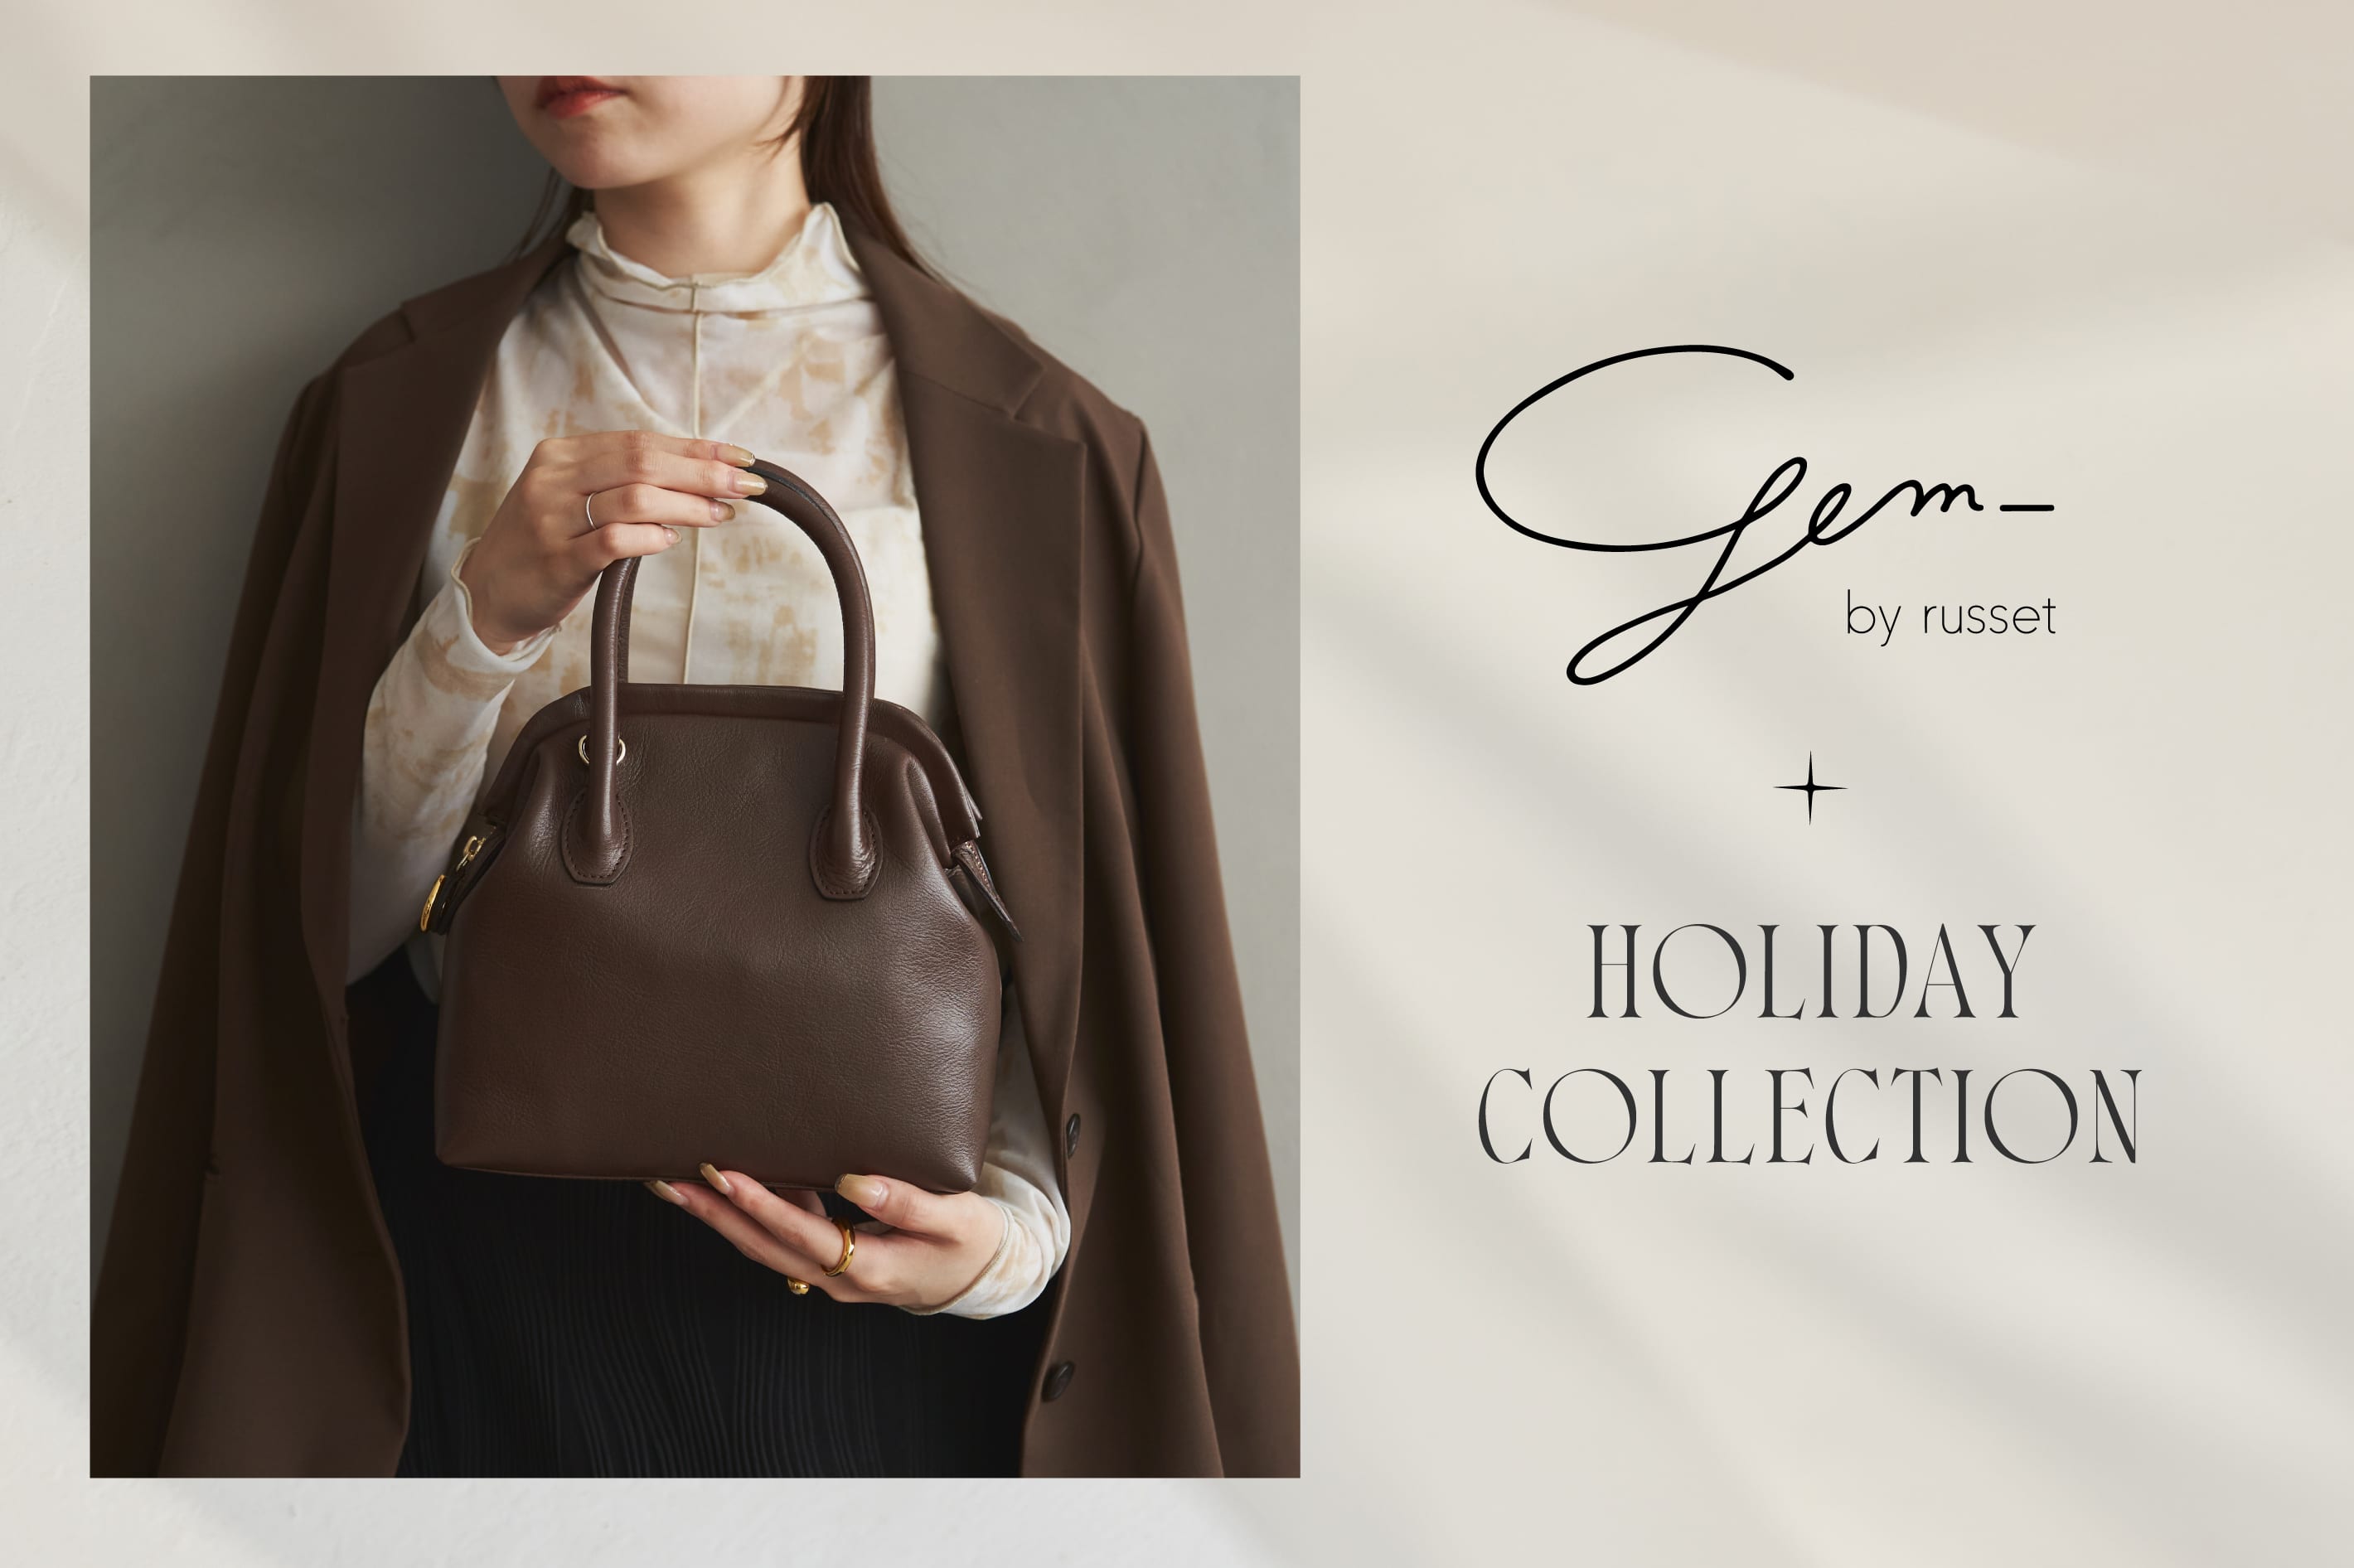 russet Holiday Collection - gem_by russet -